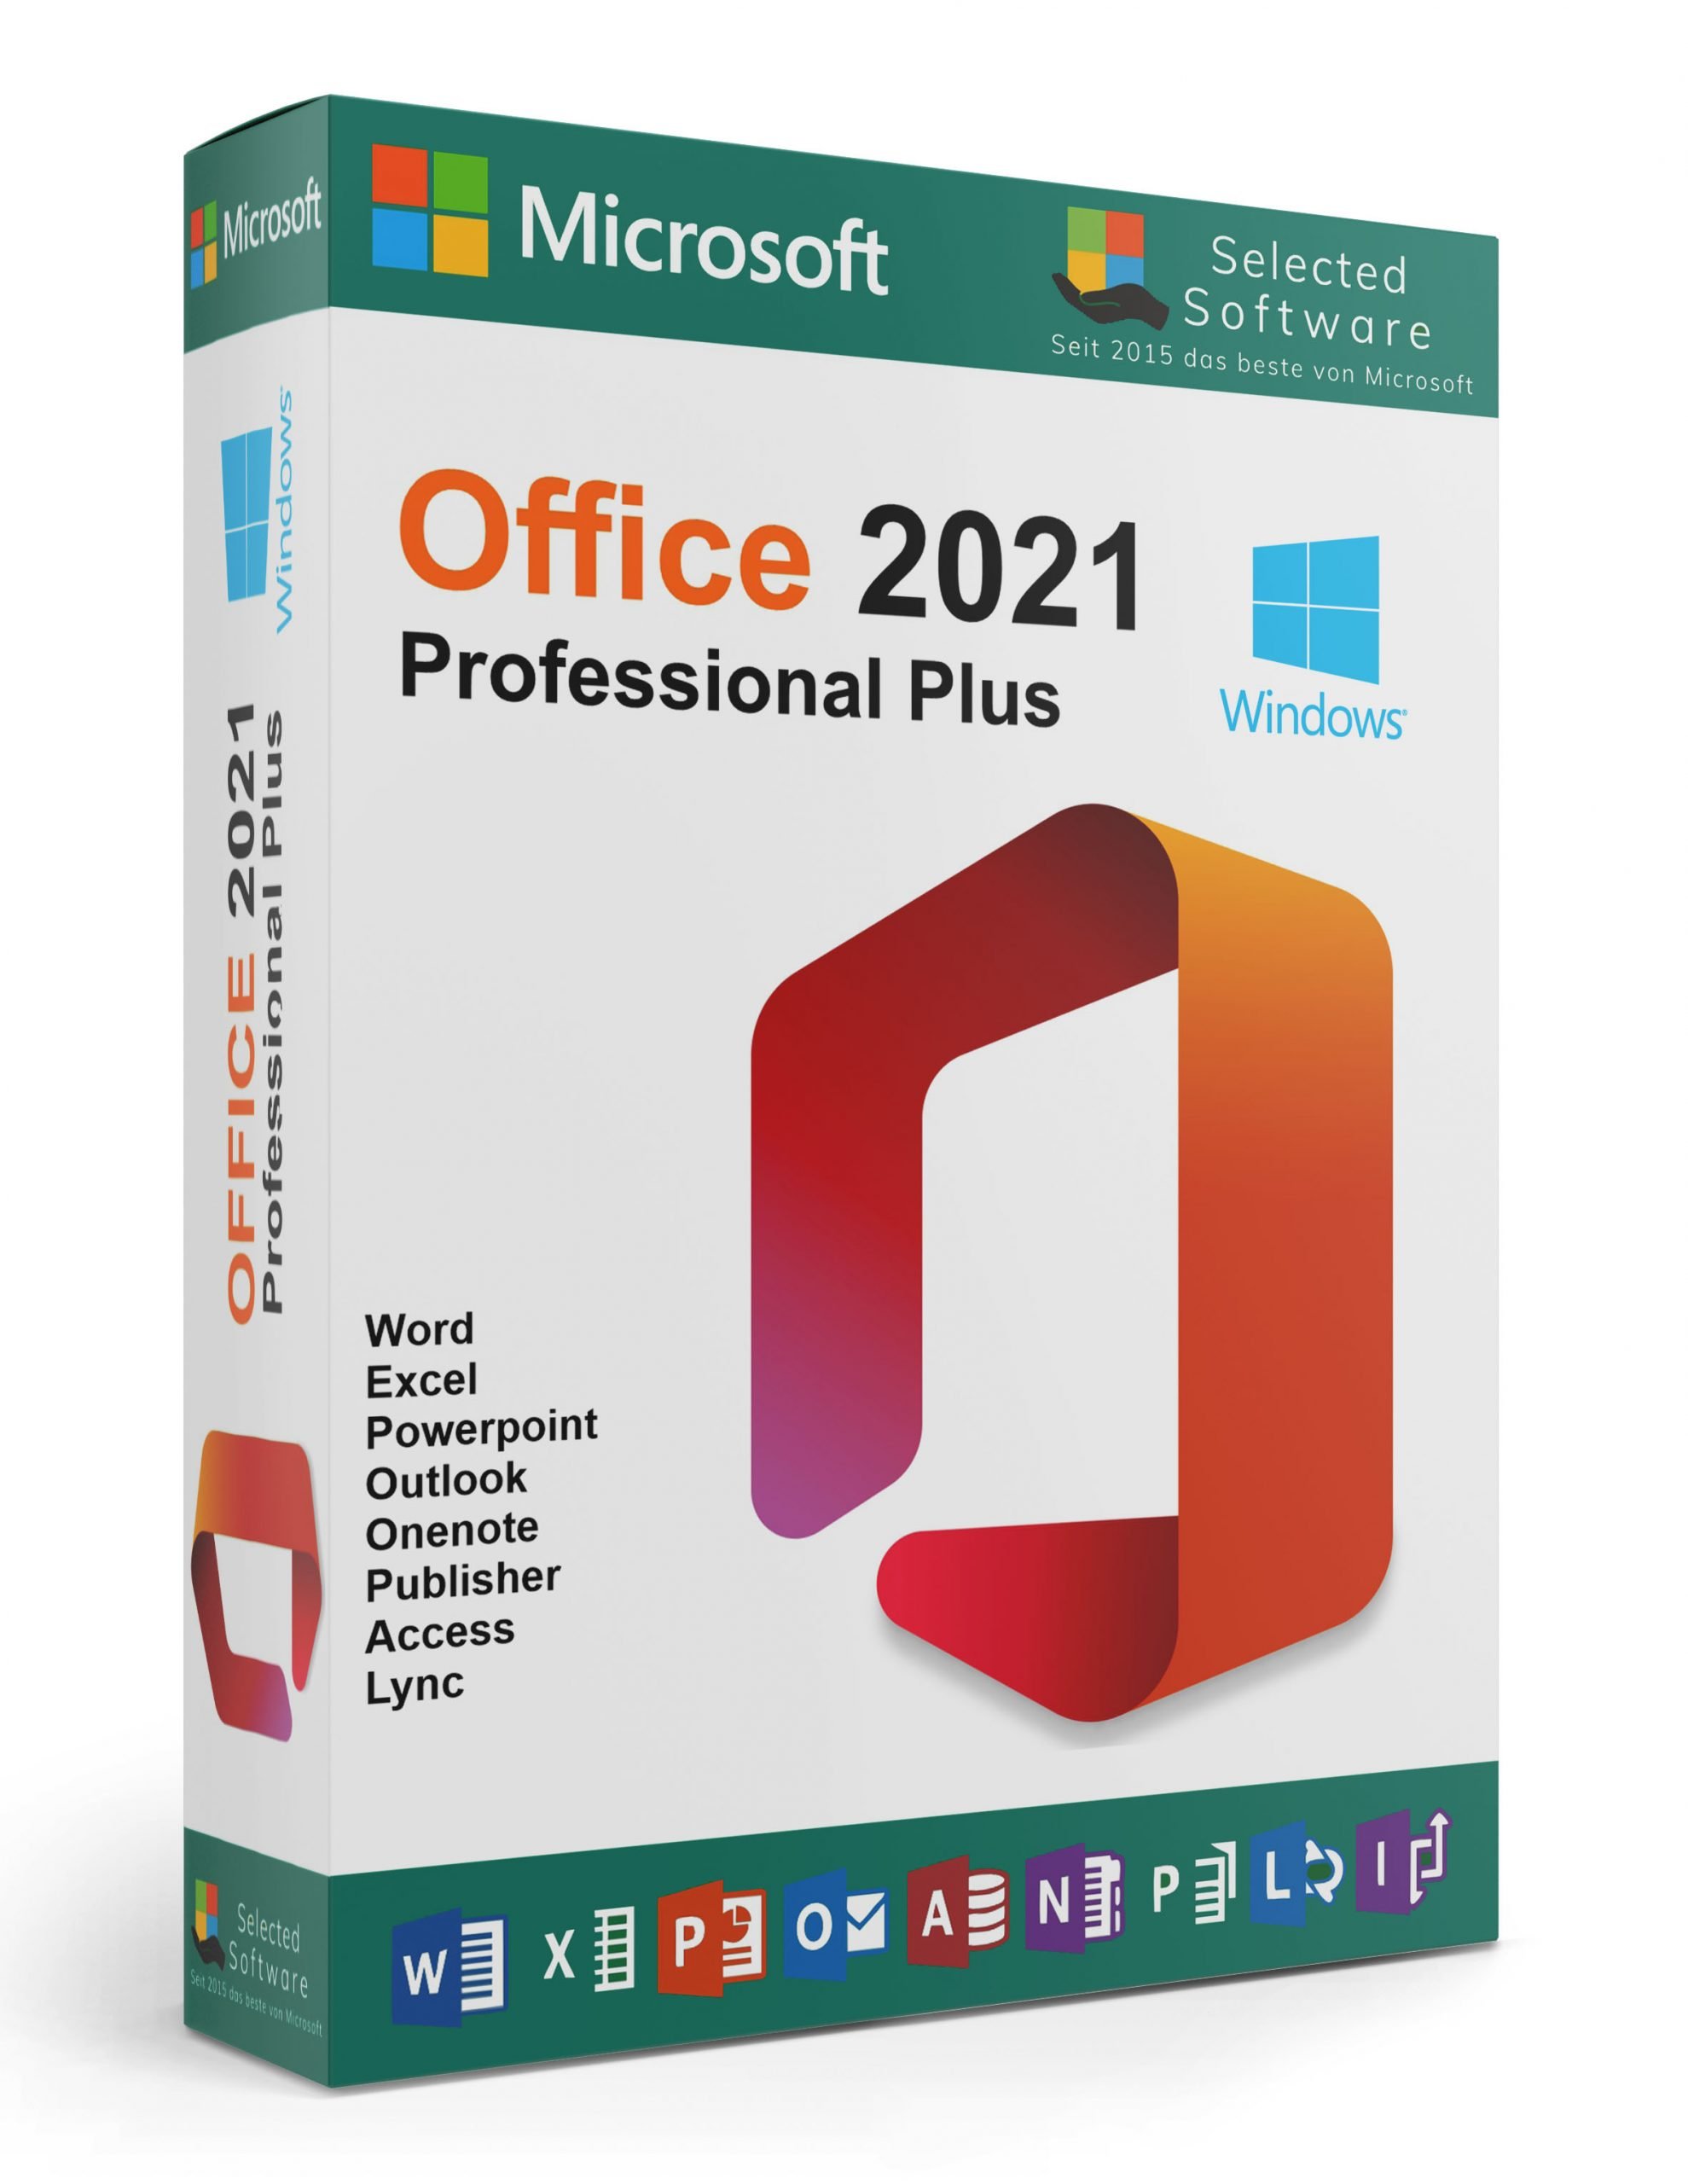 Microsoft Office Pro Plus 2021 for Windows: Lifetime License + A Free  VLOOKUP & XLOOKUP in Excel Course - Java Code Geeks